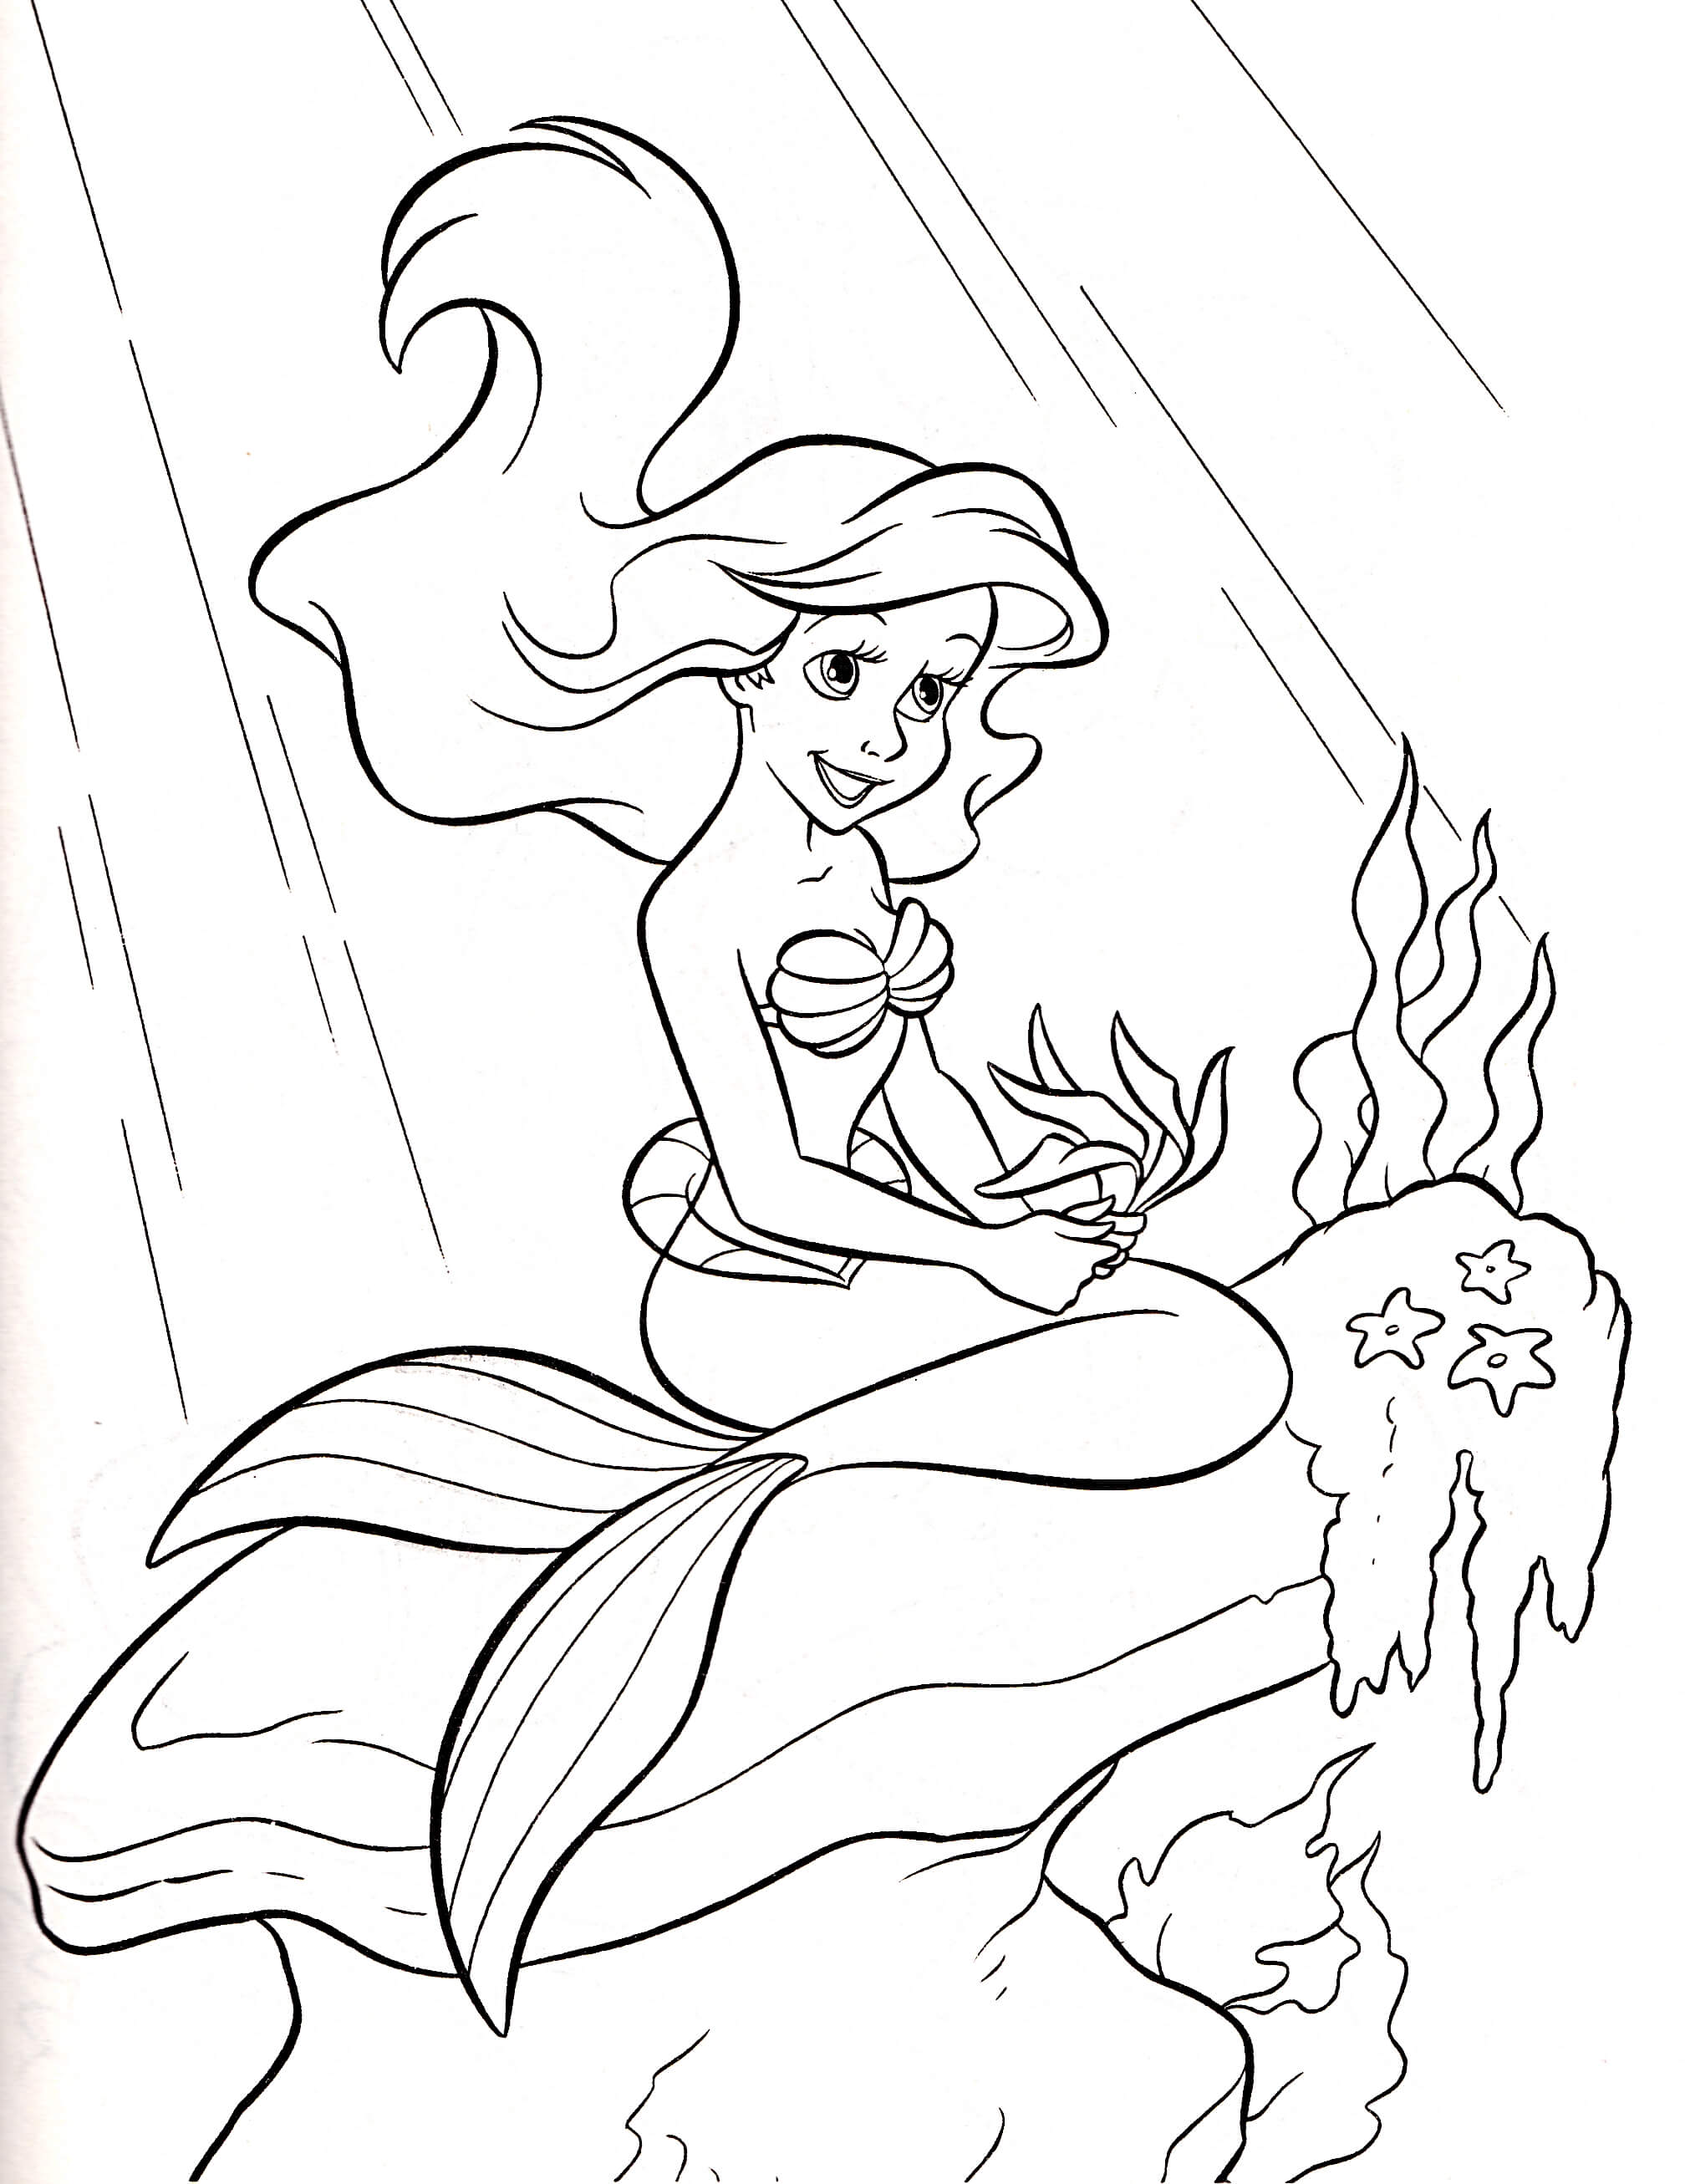 Free Coloring Pages Disney The Little Mermaid-2633 - Max Coloring